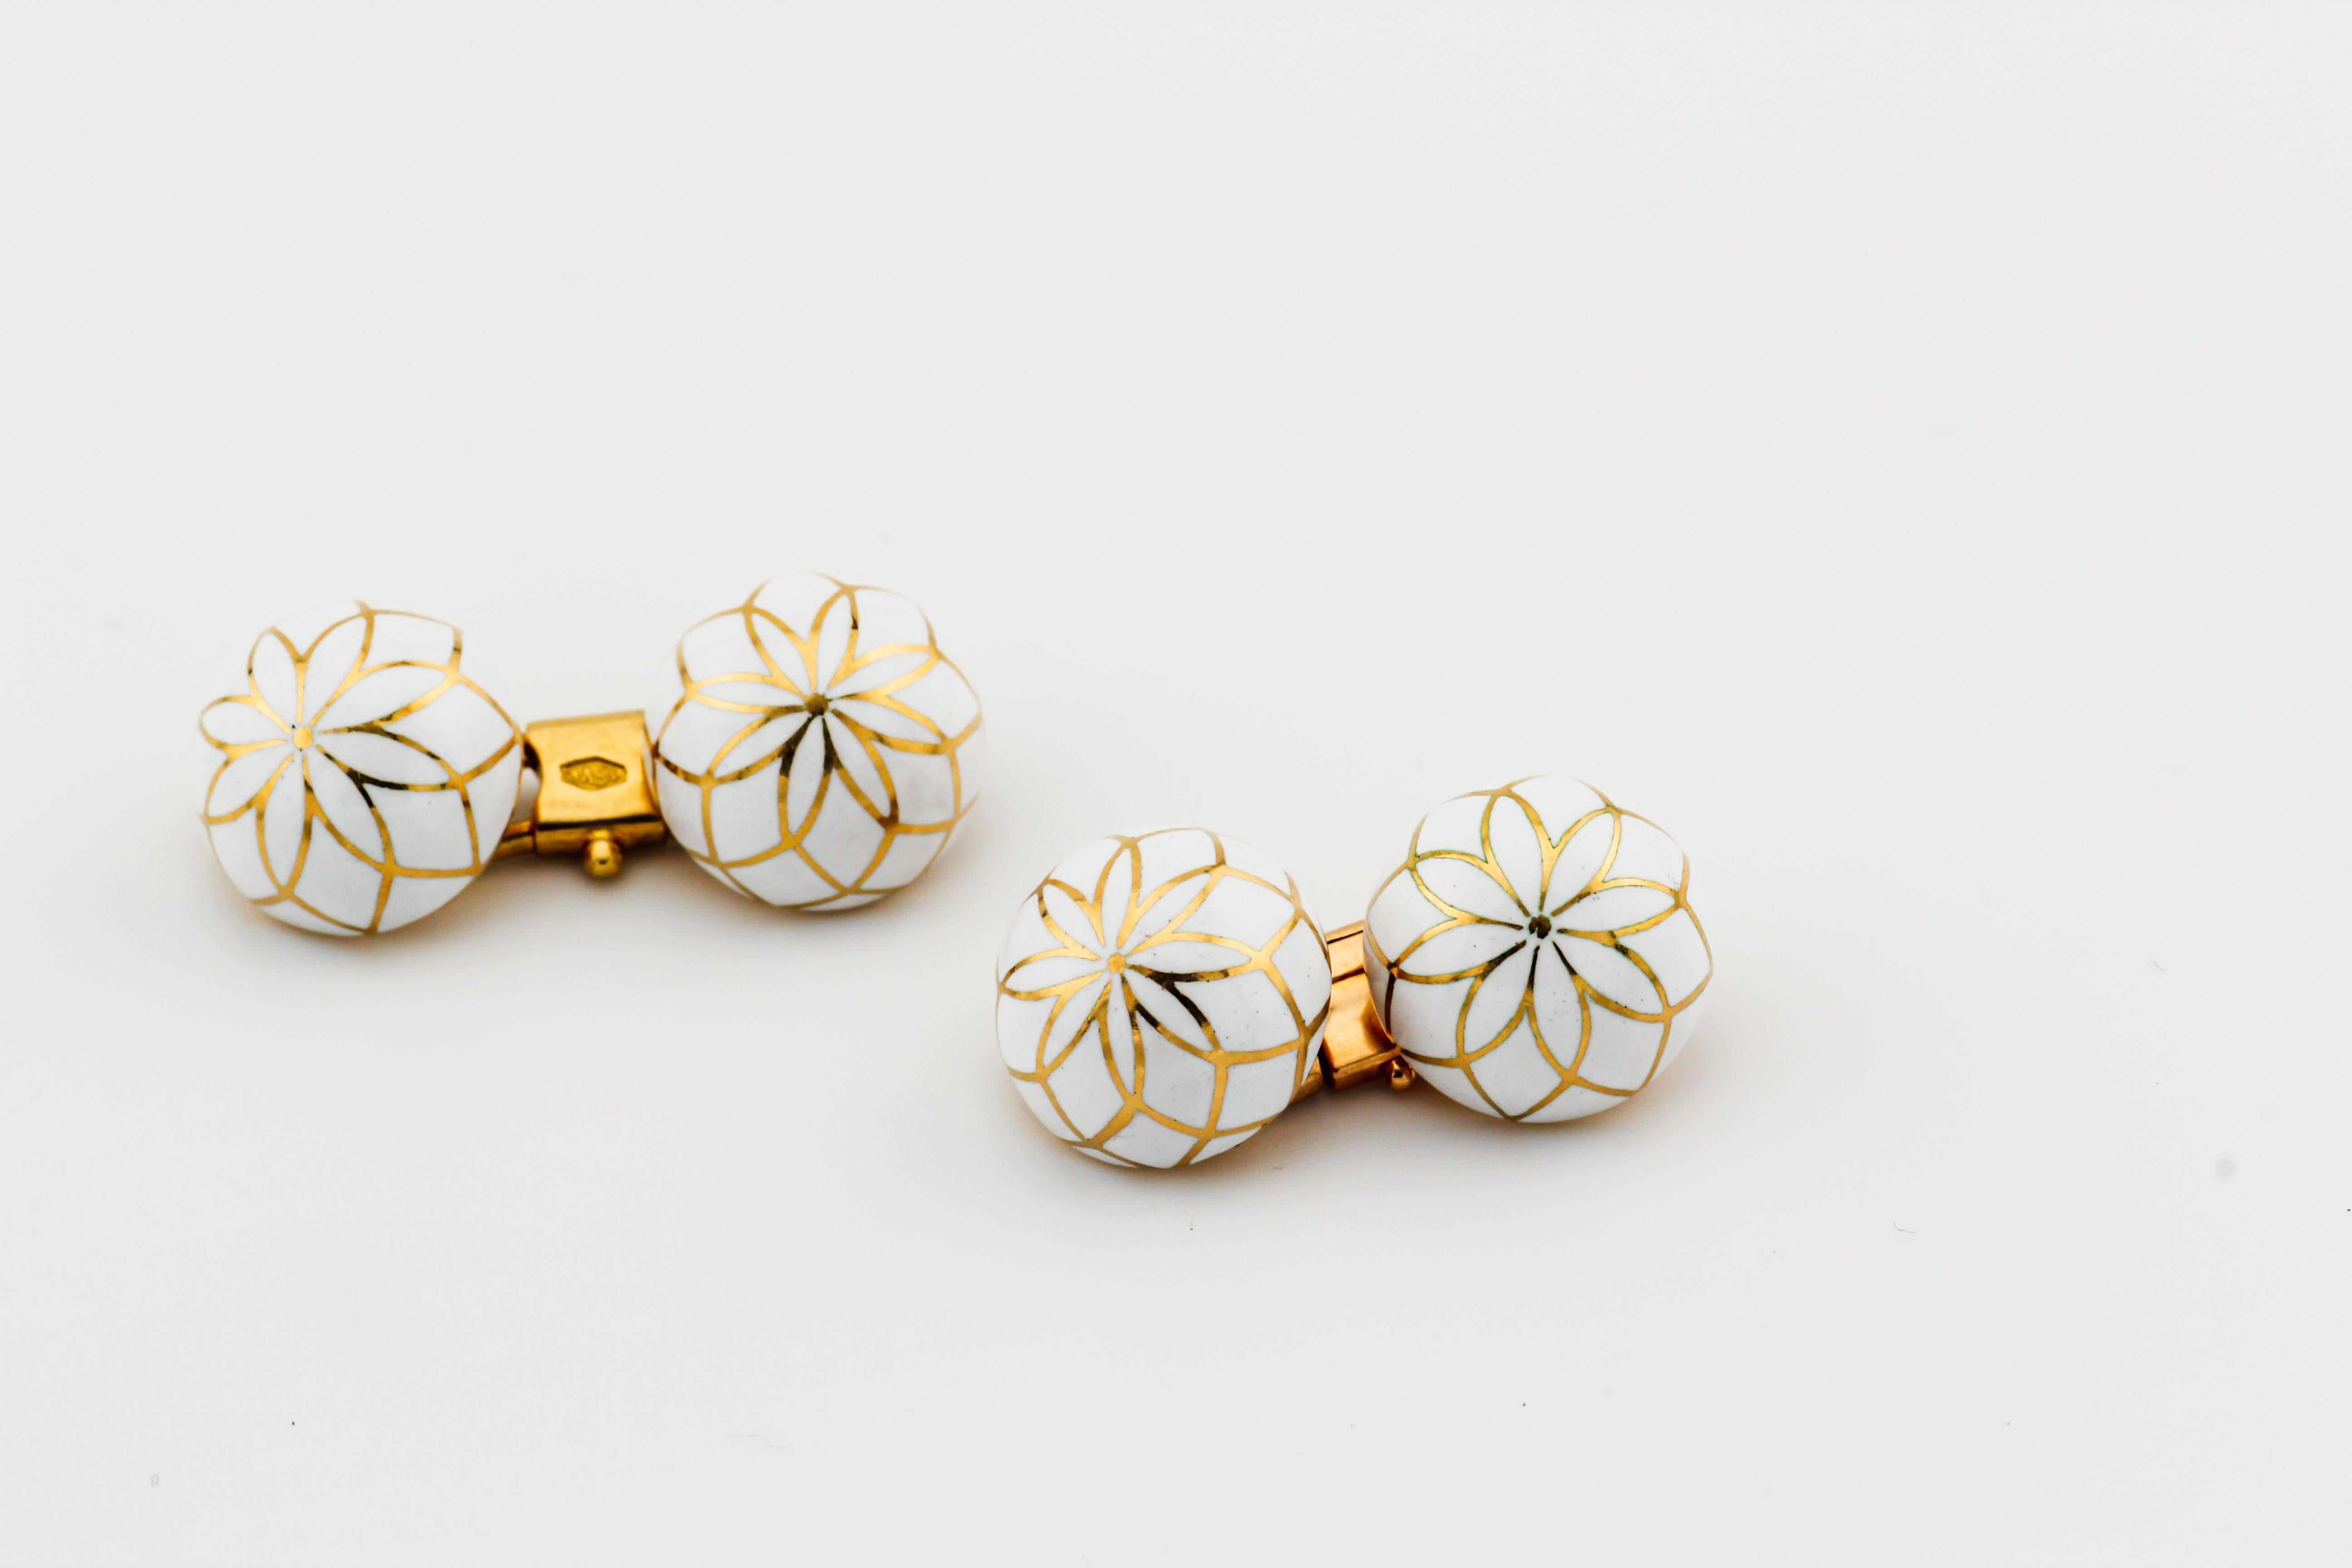 For your consideration, a fine pair of estate white enamel and 18k yellow gold cufflinks by Bulgari.

The white enamel and 18k yellow gold dome cufflinks by Bulgari, circa 1960s, are an exquisite example of the brand's timeless elegance and